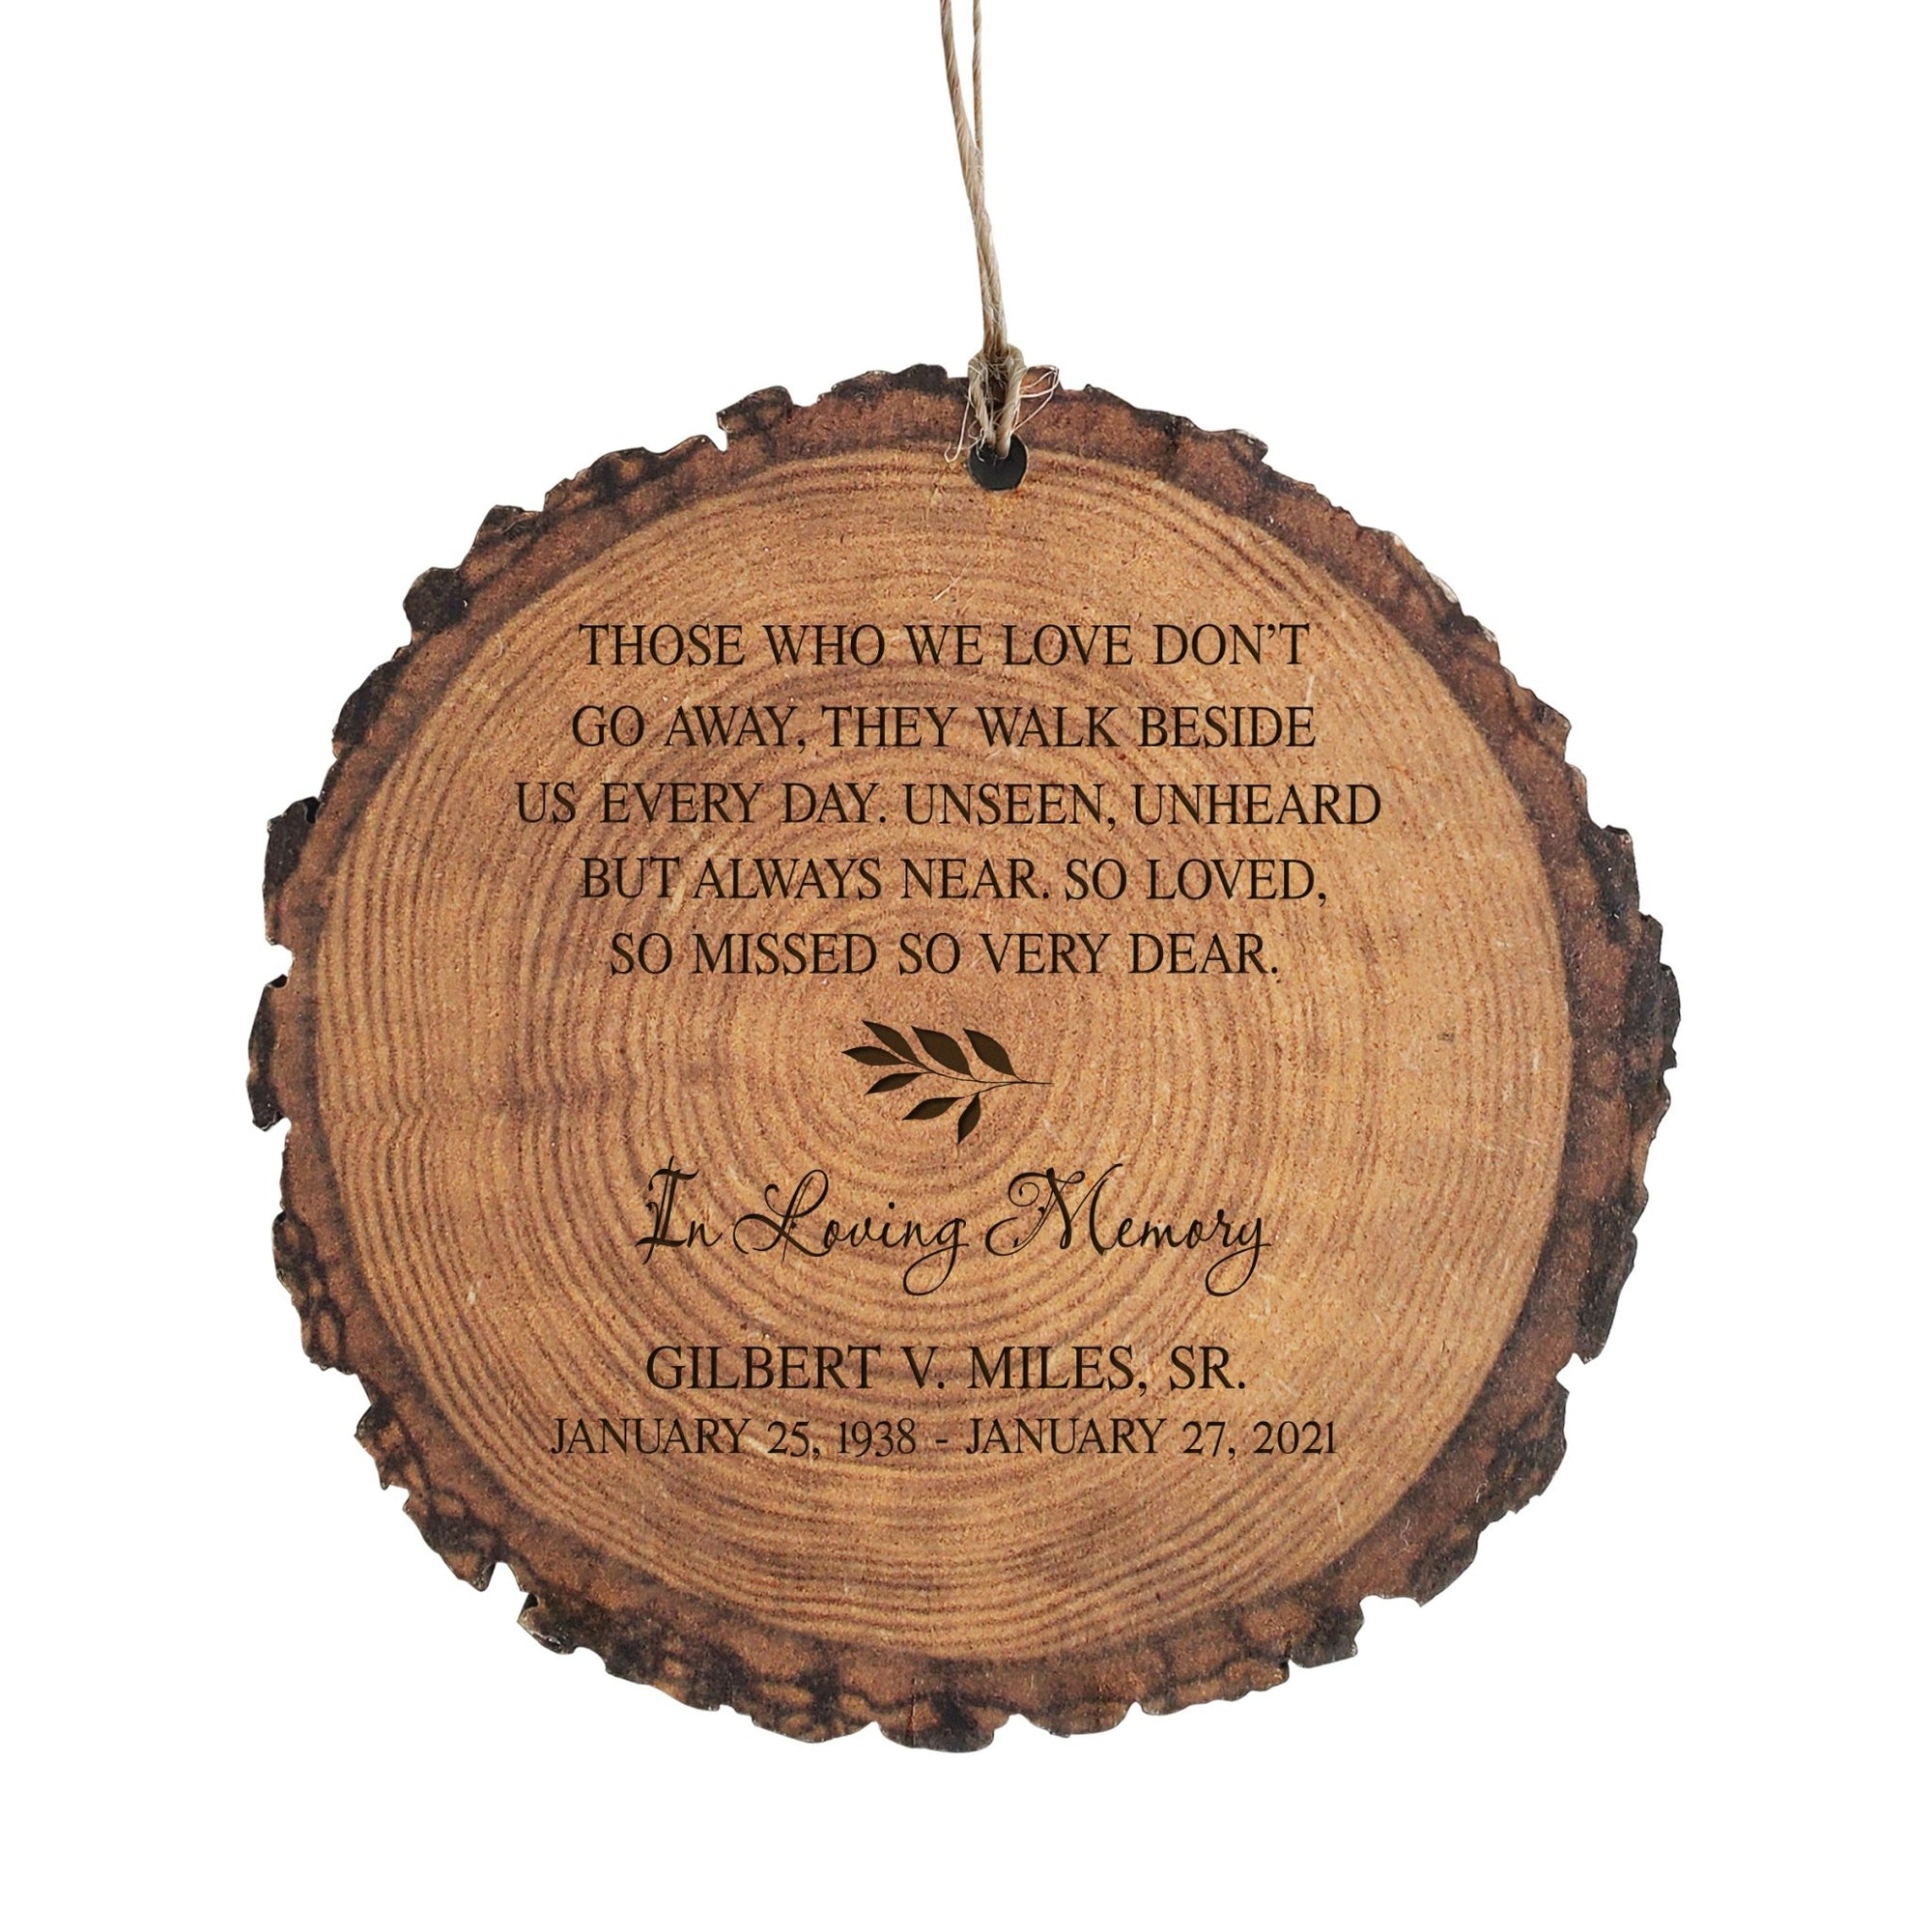 LifeSong Milestones Engraved Hanging Memorial Barky Ornament for Loss of Loved One